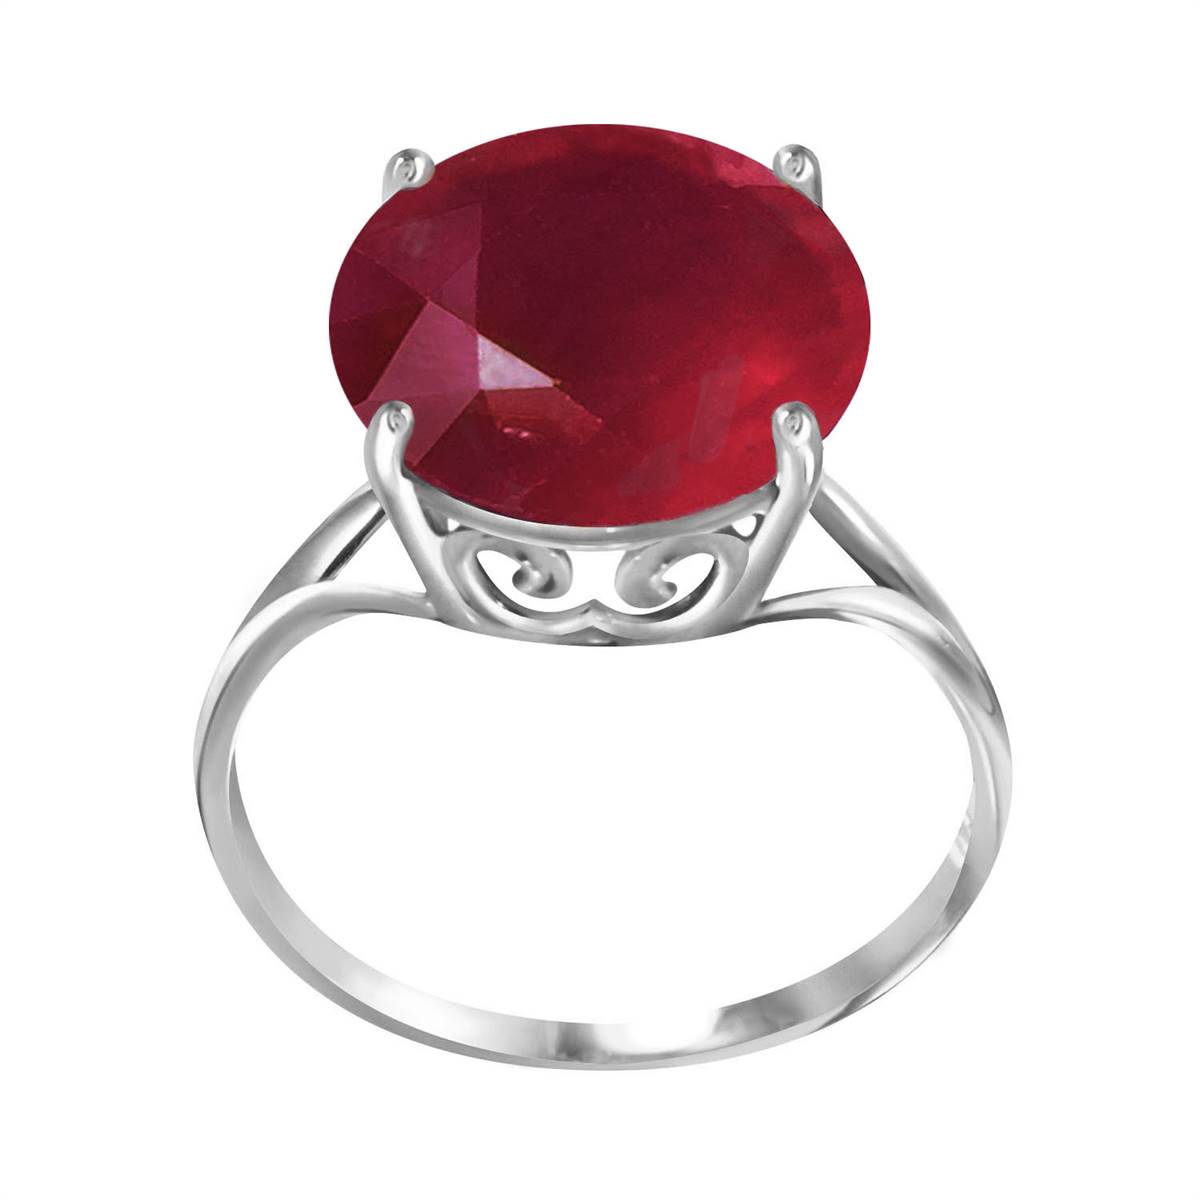 14K Solid White Gold Ring w/ Natural 12.0 mm Round Ruby